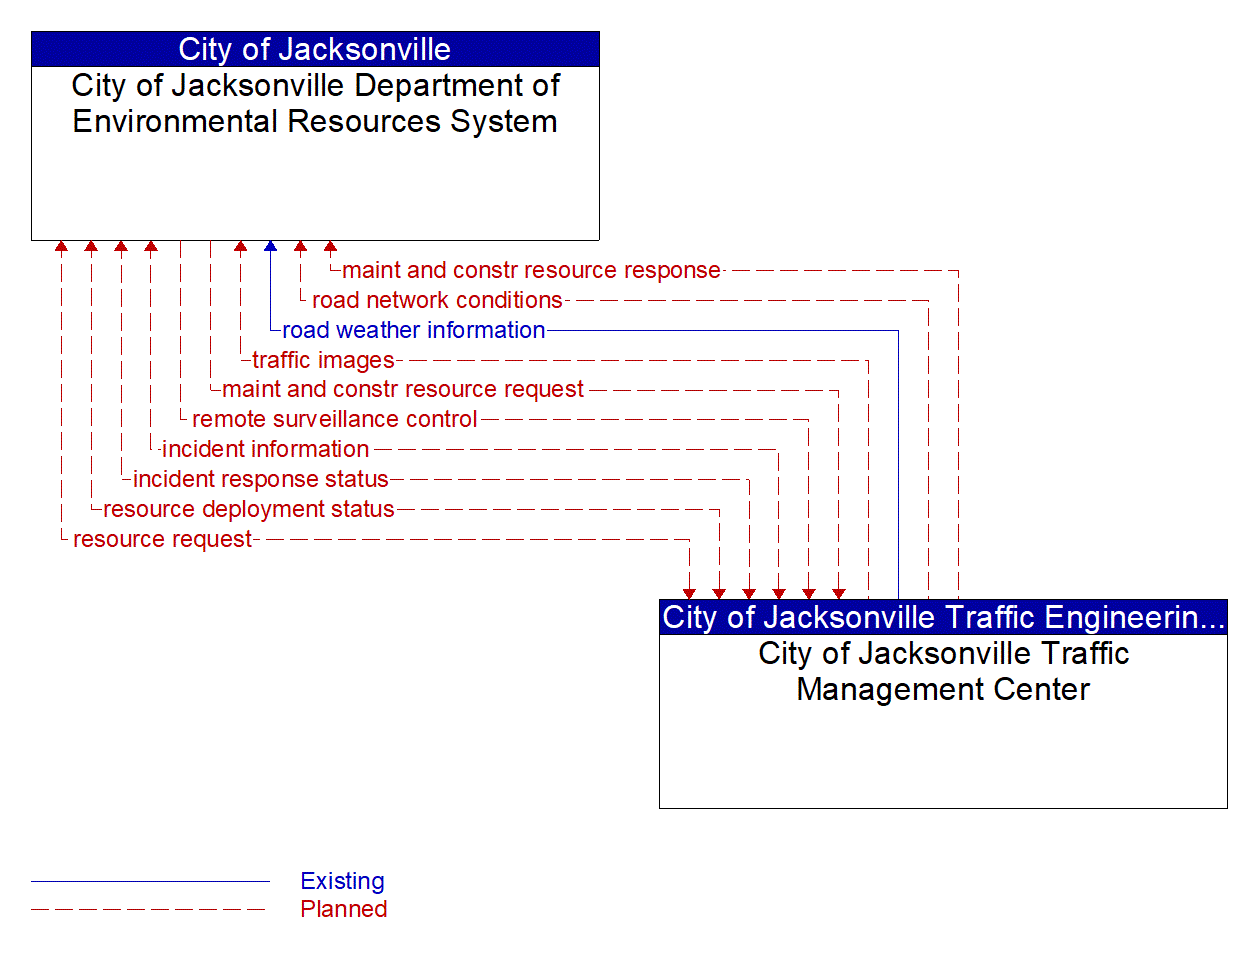 Architecture Flow Diagram: City of Jacksonville Traffic Management Center <--> City of Jacksonville Department of Environmental Resources System